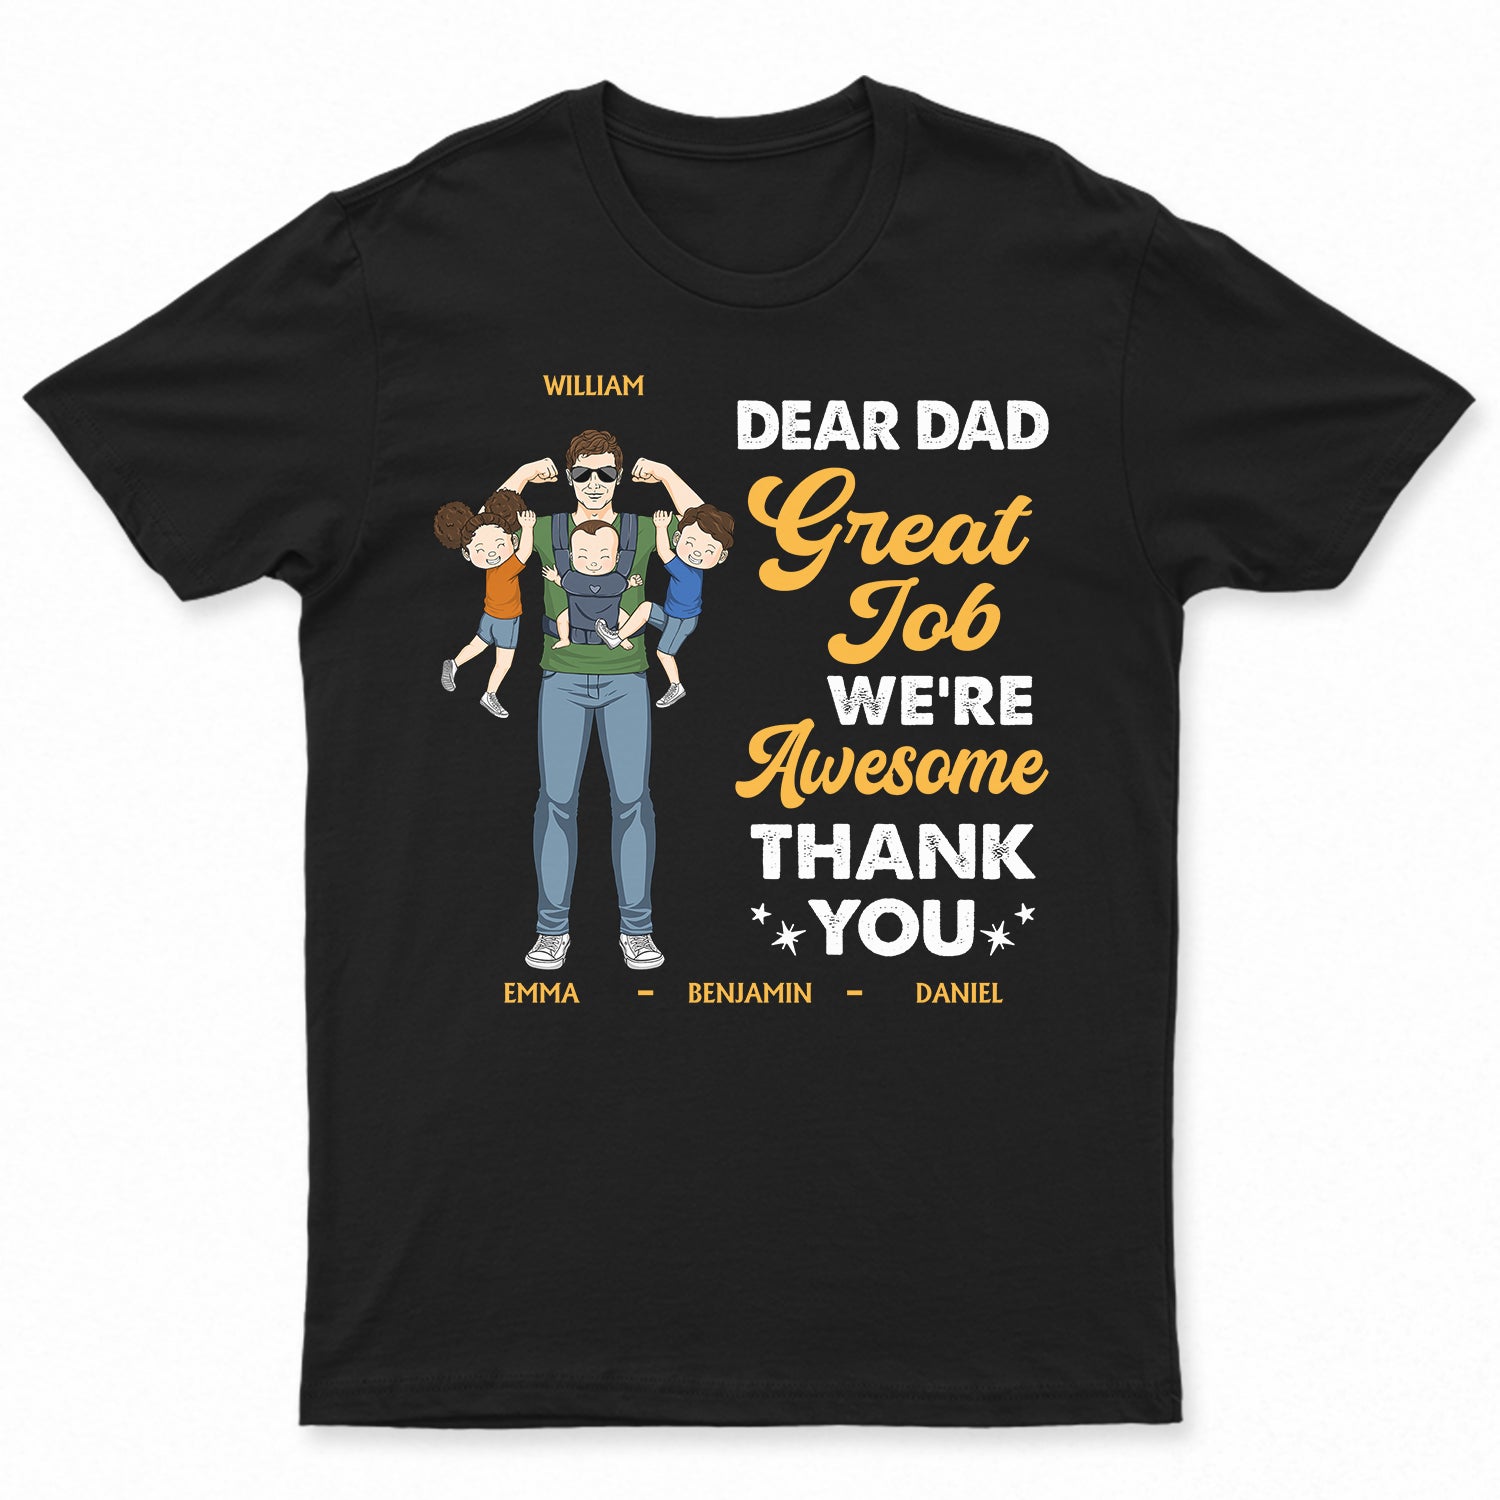 Great Job We're Awesome Strong Dad - Birthday, Loving Gift For Father, Grandpa, Grandfather - Personalized Custom T Shirt